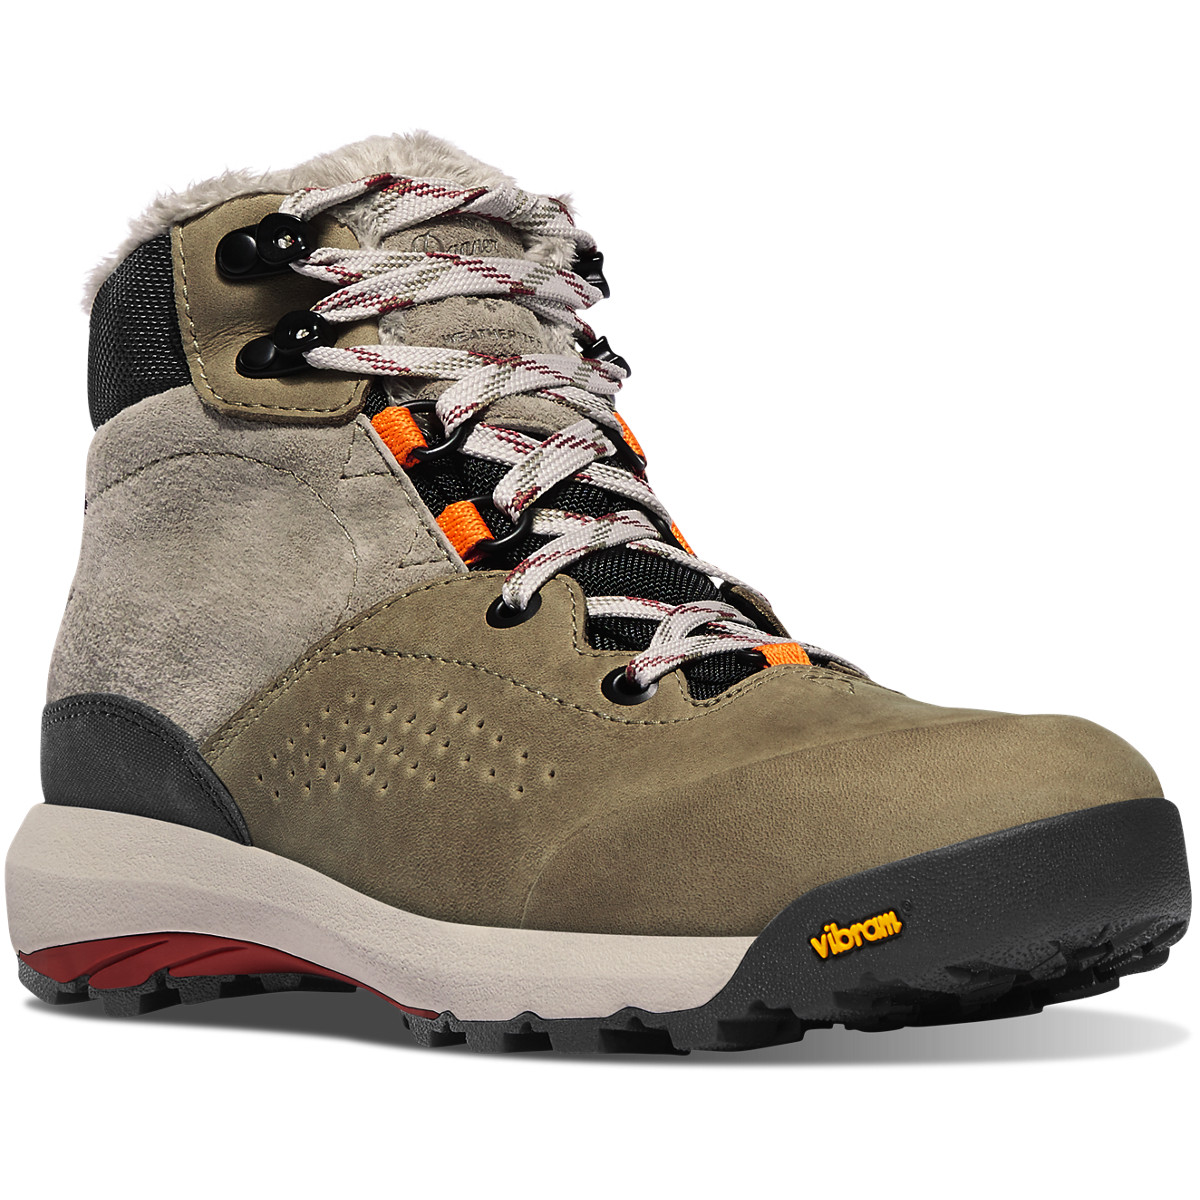 Danner Inquire Mid Insulated - Chaussures Randonnée Vert Olive/Grise - Femme ( France 74063TRQX )